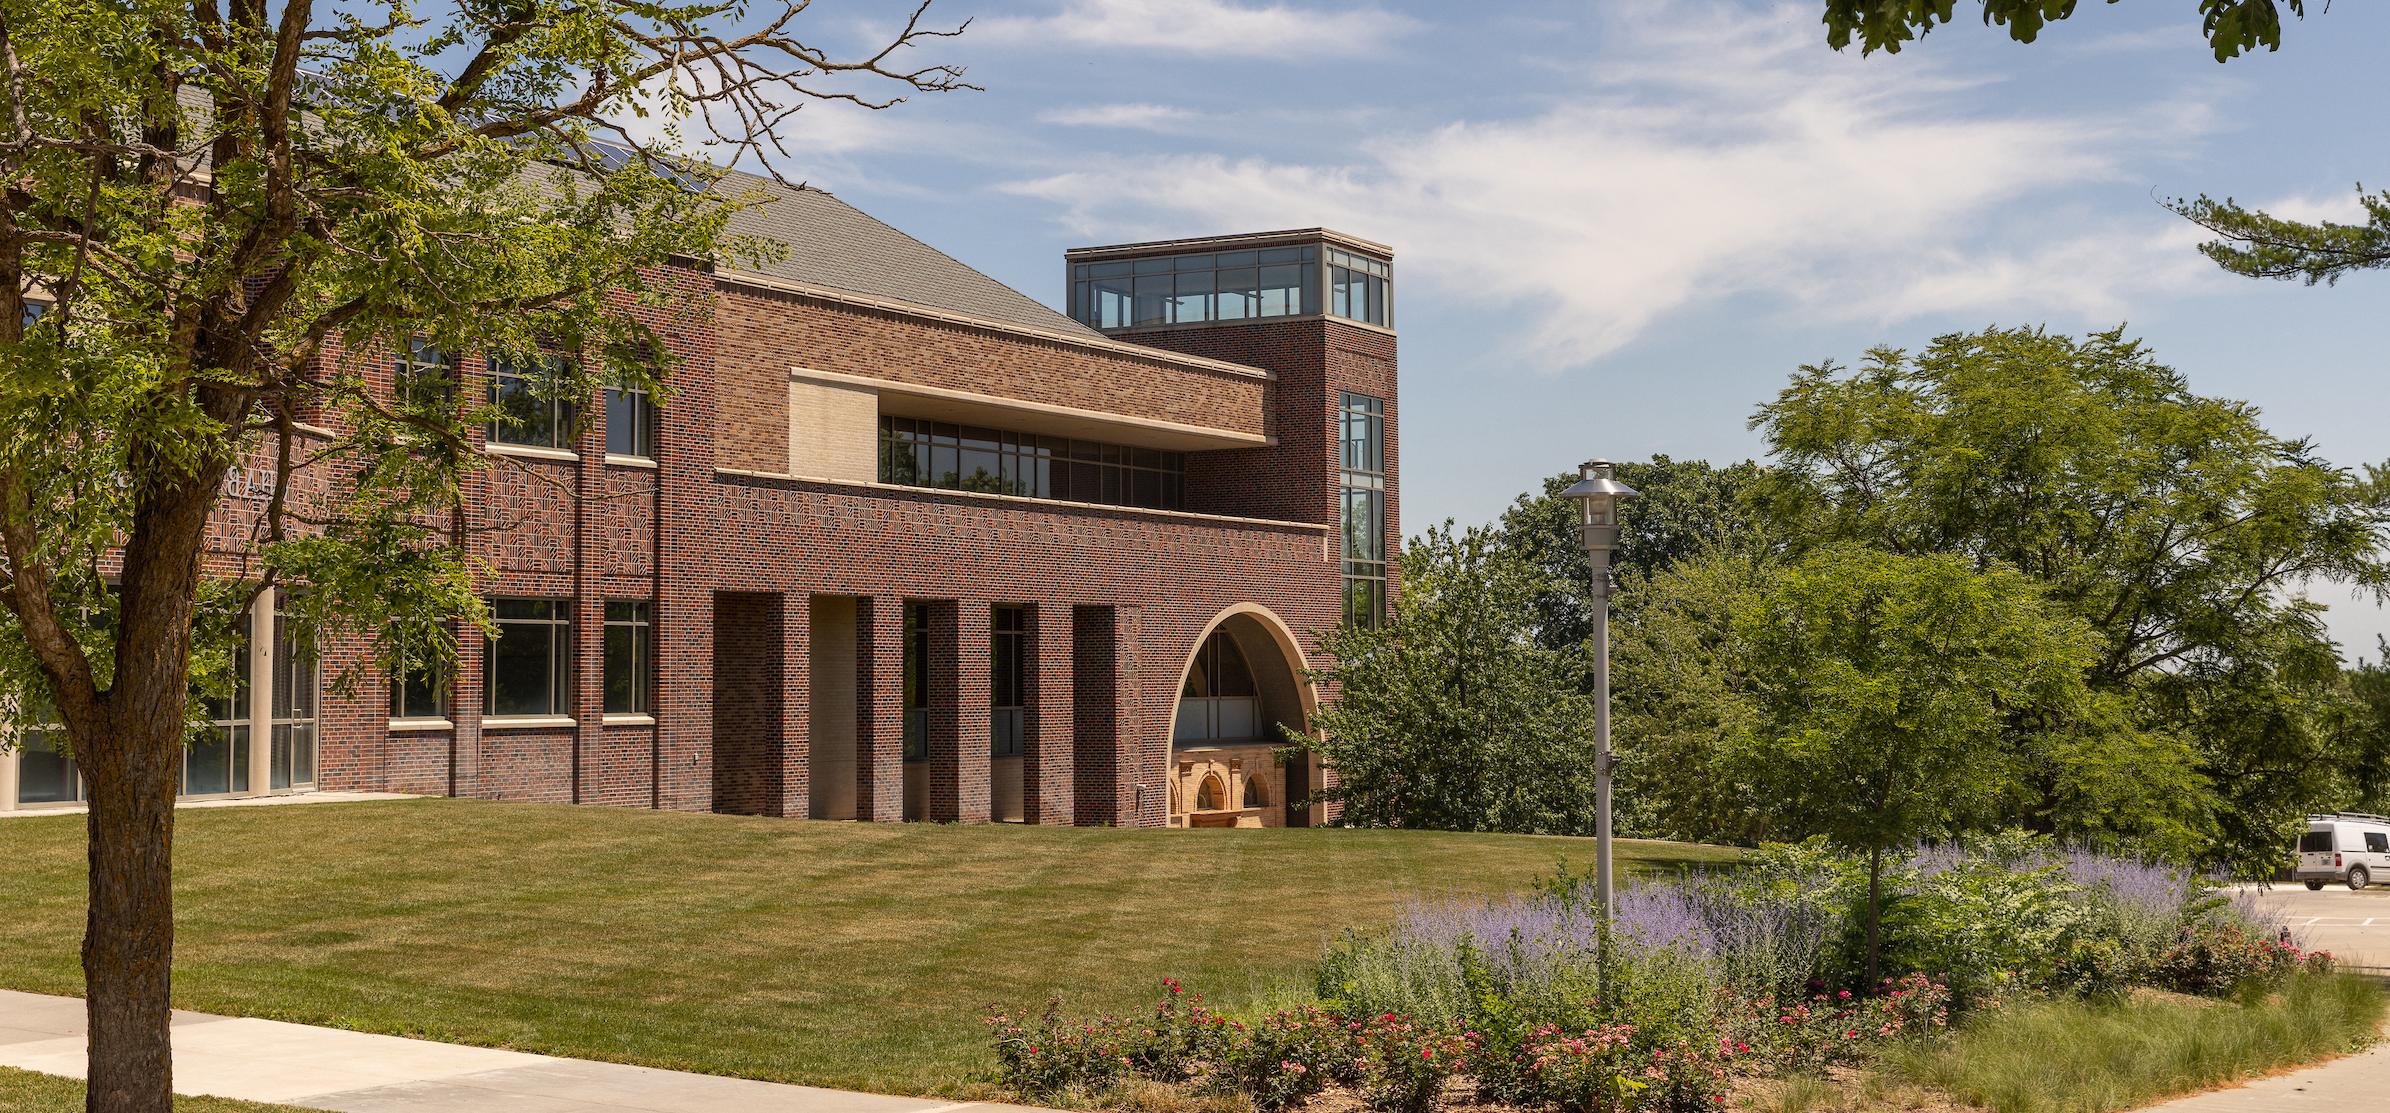 Office of Admissions Building on Crete Campus